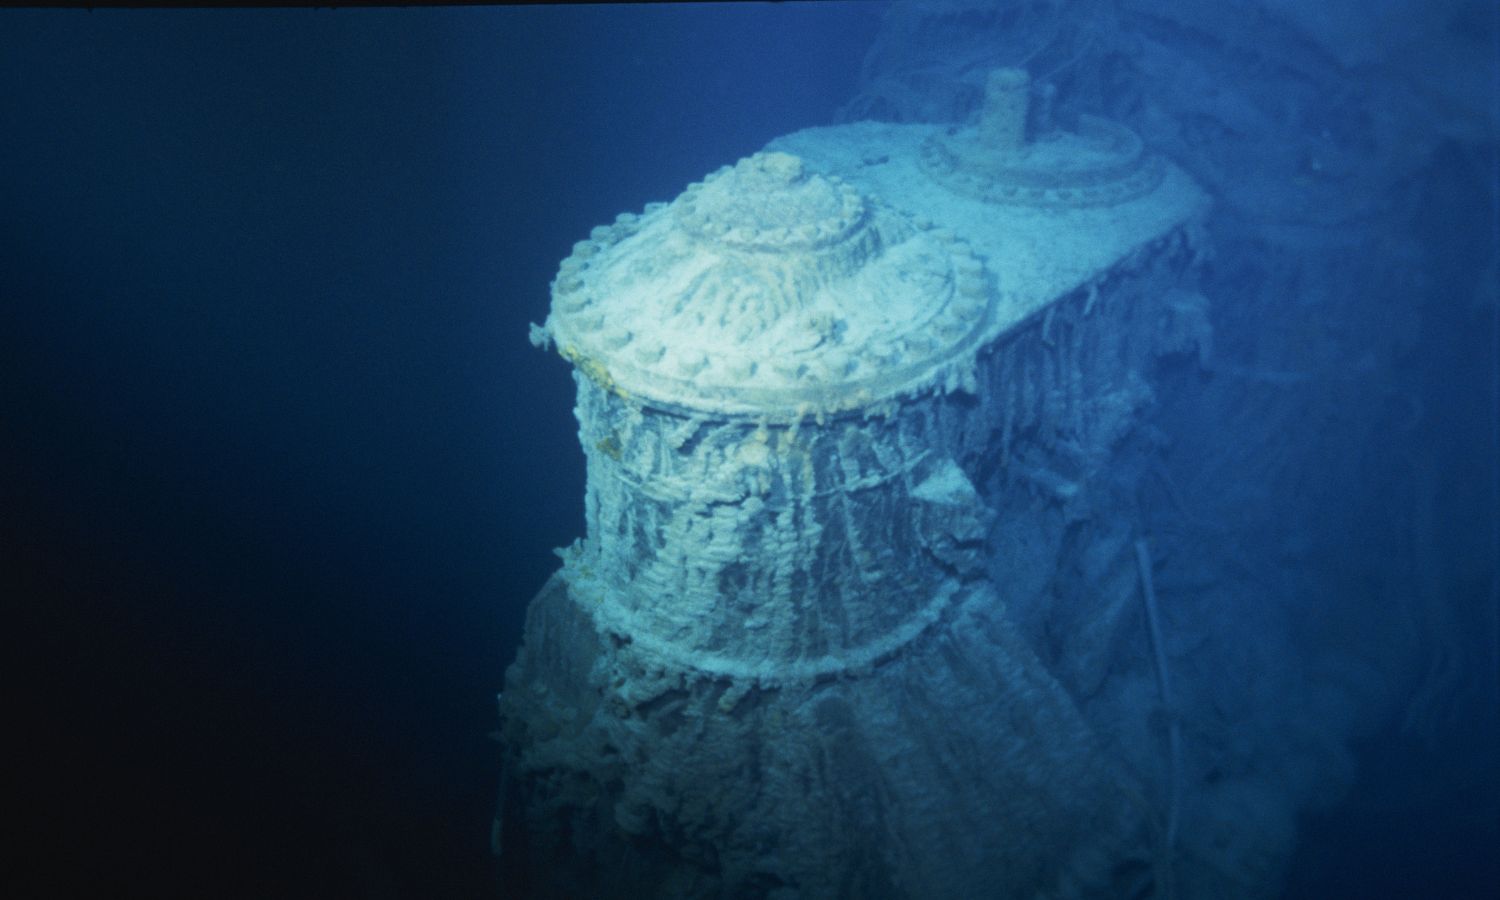 An image showing a part of the Titanic shipwreck